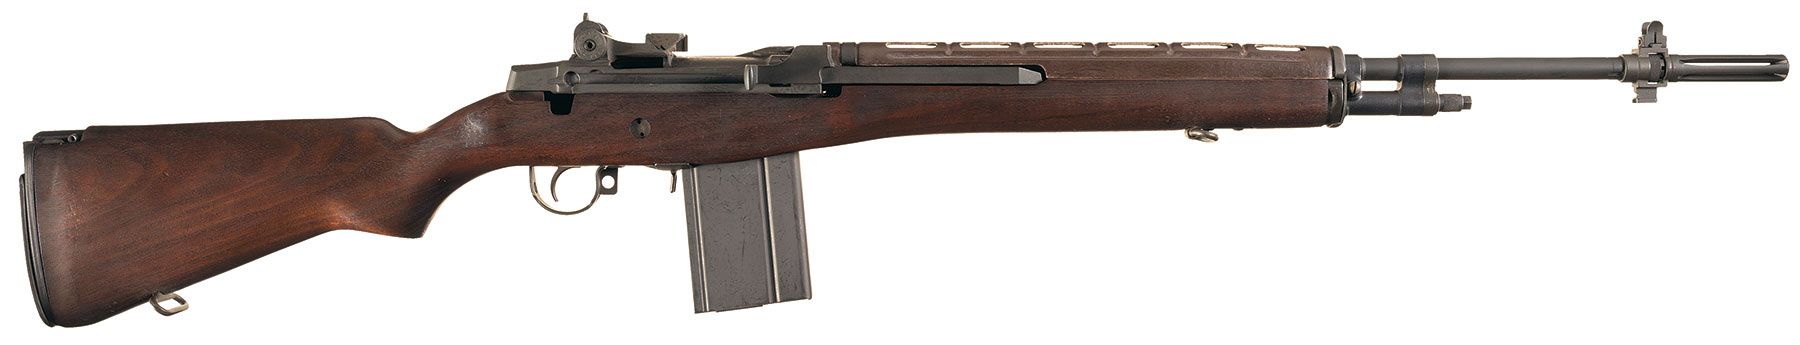 291094 springfield armory serial number date m1a